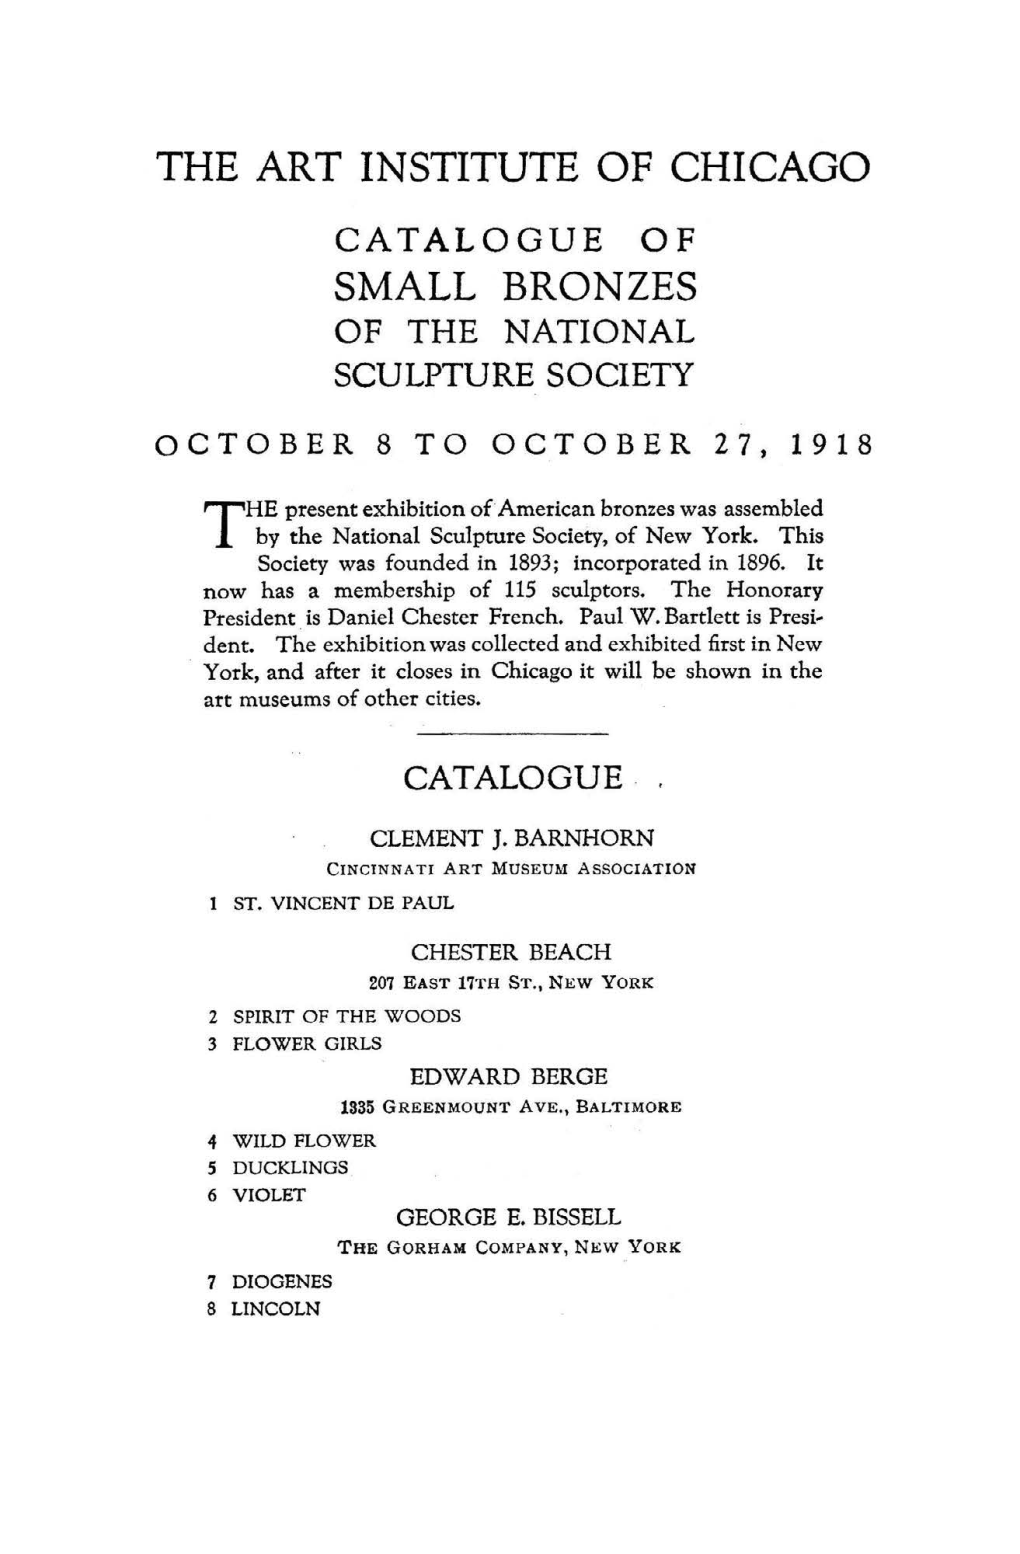 Catalogue of Small Bronzes of the National Sculpture Society